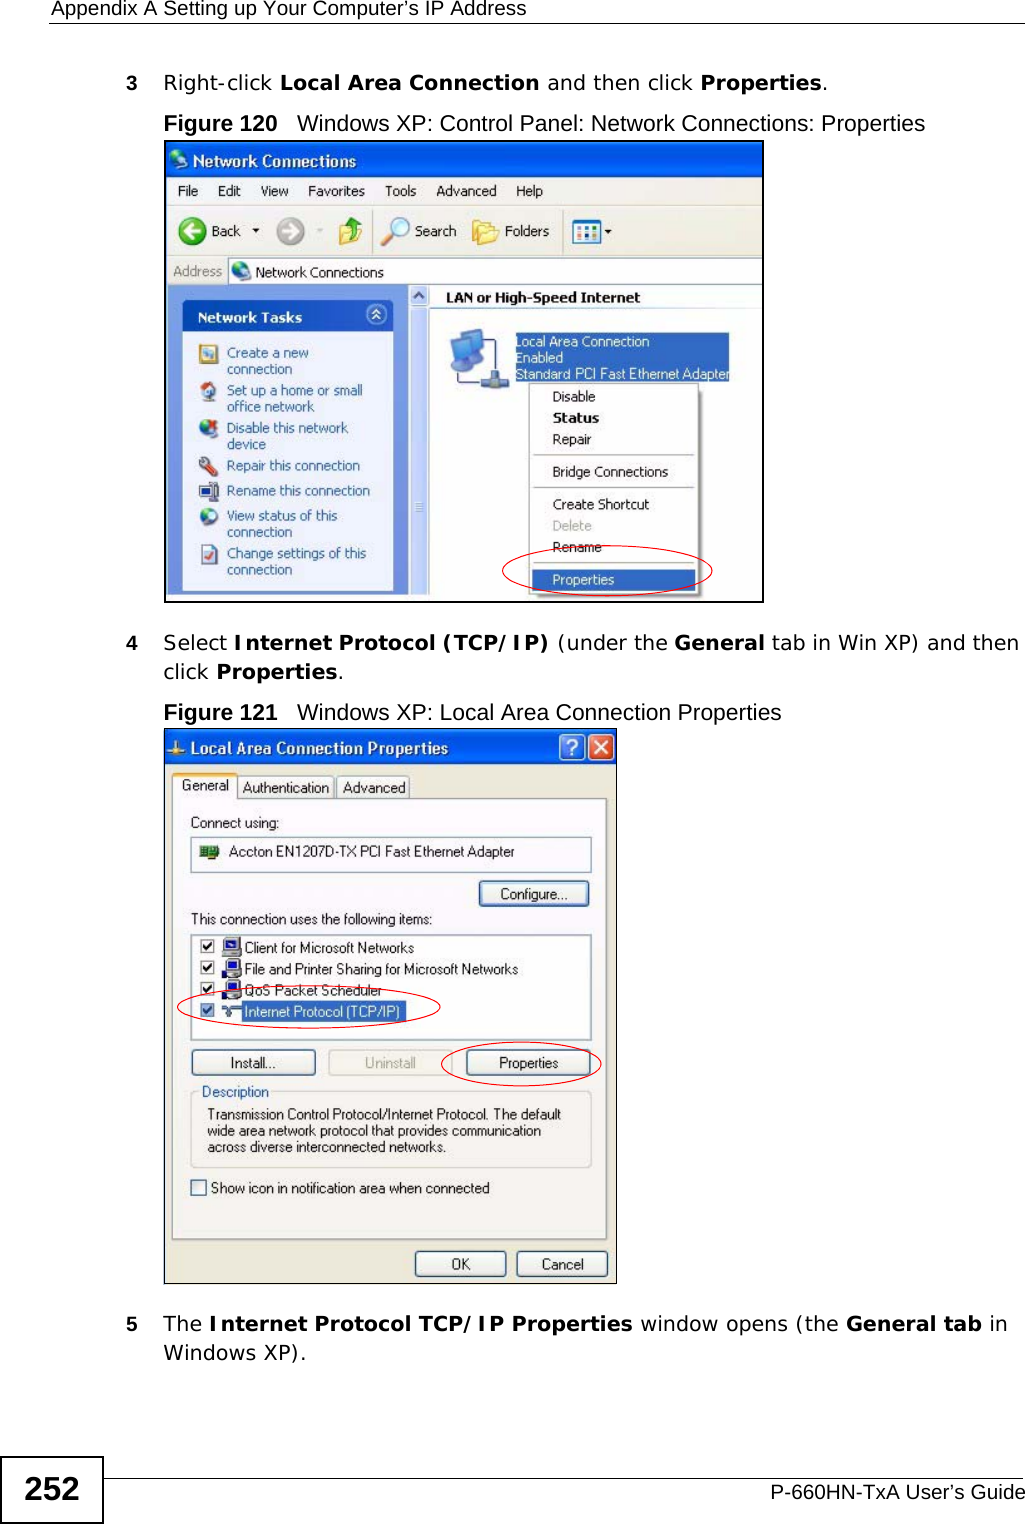 Appendix A Setting up Your Computer’s IP AddressP-660HN-TxA User’s Guide2523Right-click Local Area Connection and then click Properties.Figure 120   Windows XP: Control Panel: Network Connections: Properties4Select Internet Protocol (TCP/IP) (under the General tab in Win XP) and then click Properties.Figure 121   Windows XP: Local Area Connection Properties5The Internet Protocol TCP/IP Properties window opens (the General tab in Windows XP).